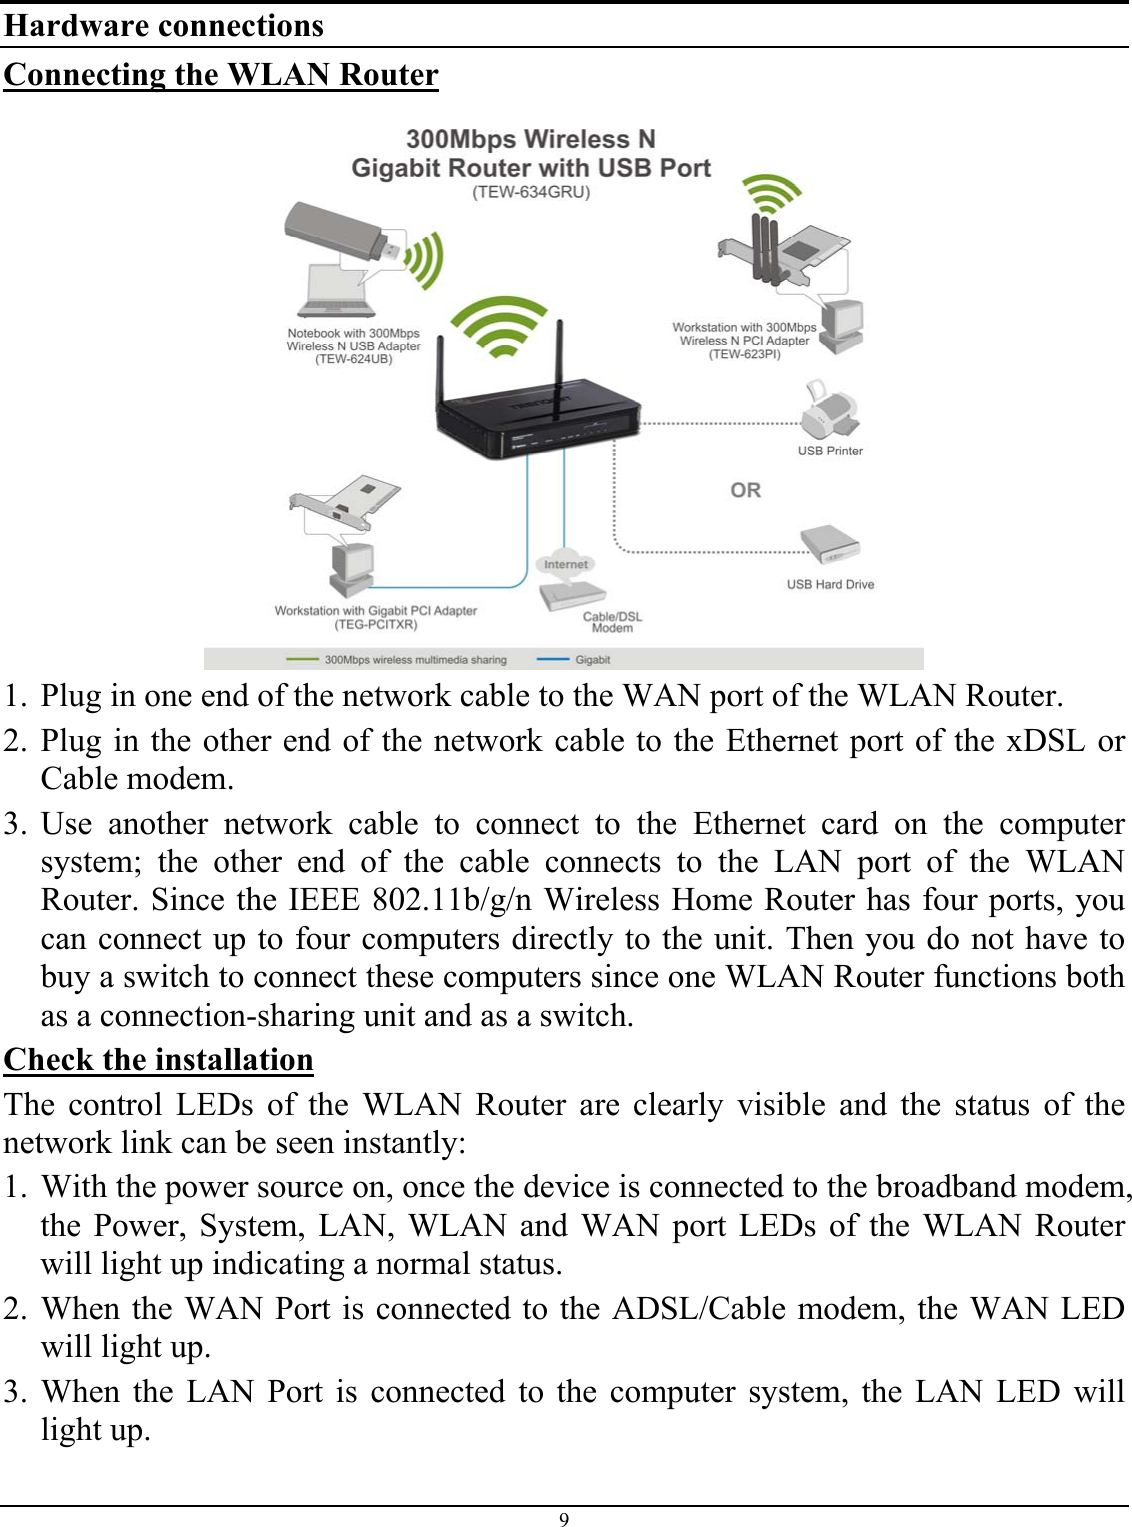 9  Hardware connections Connecting the WLAN Router   1. Plug in one end of the network cable to the WAN port of the WLAN Router. 2. Plug in the other end of the network cable to the Ethernet port of the xDSL or Cable modem. 3. Use another network cable to connect to the Ethernet card on the computer system; the other end of the cable connects to the LAN port of the WLAN Router. Since the IEEE 802.11b/g/n Wireless Home Router has four ports, you can connect up to four computers directly to the unit. Then you do not have to buy a switch to connect these computers since one WLAN Router functions both as a connection-sharing unit and as a switch. Check the installation The control LEDs of the WLAN Router are clearly visible and the status of the network link can be seen instantly: 1. With the power source on, once the device is connected to the broadband modem, the Power, System, LAN, WLAN and WAN port LEDs of the WLAN Router will light up indicating a normal status. 2. When the WAN Port is connected to the ADSL/Cable modem, the WAN LED will light up. 3. When the LAN Port is connected to the computer system, the LAN LED will light up. 